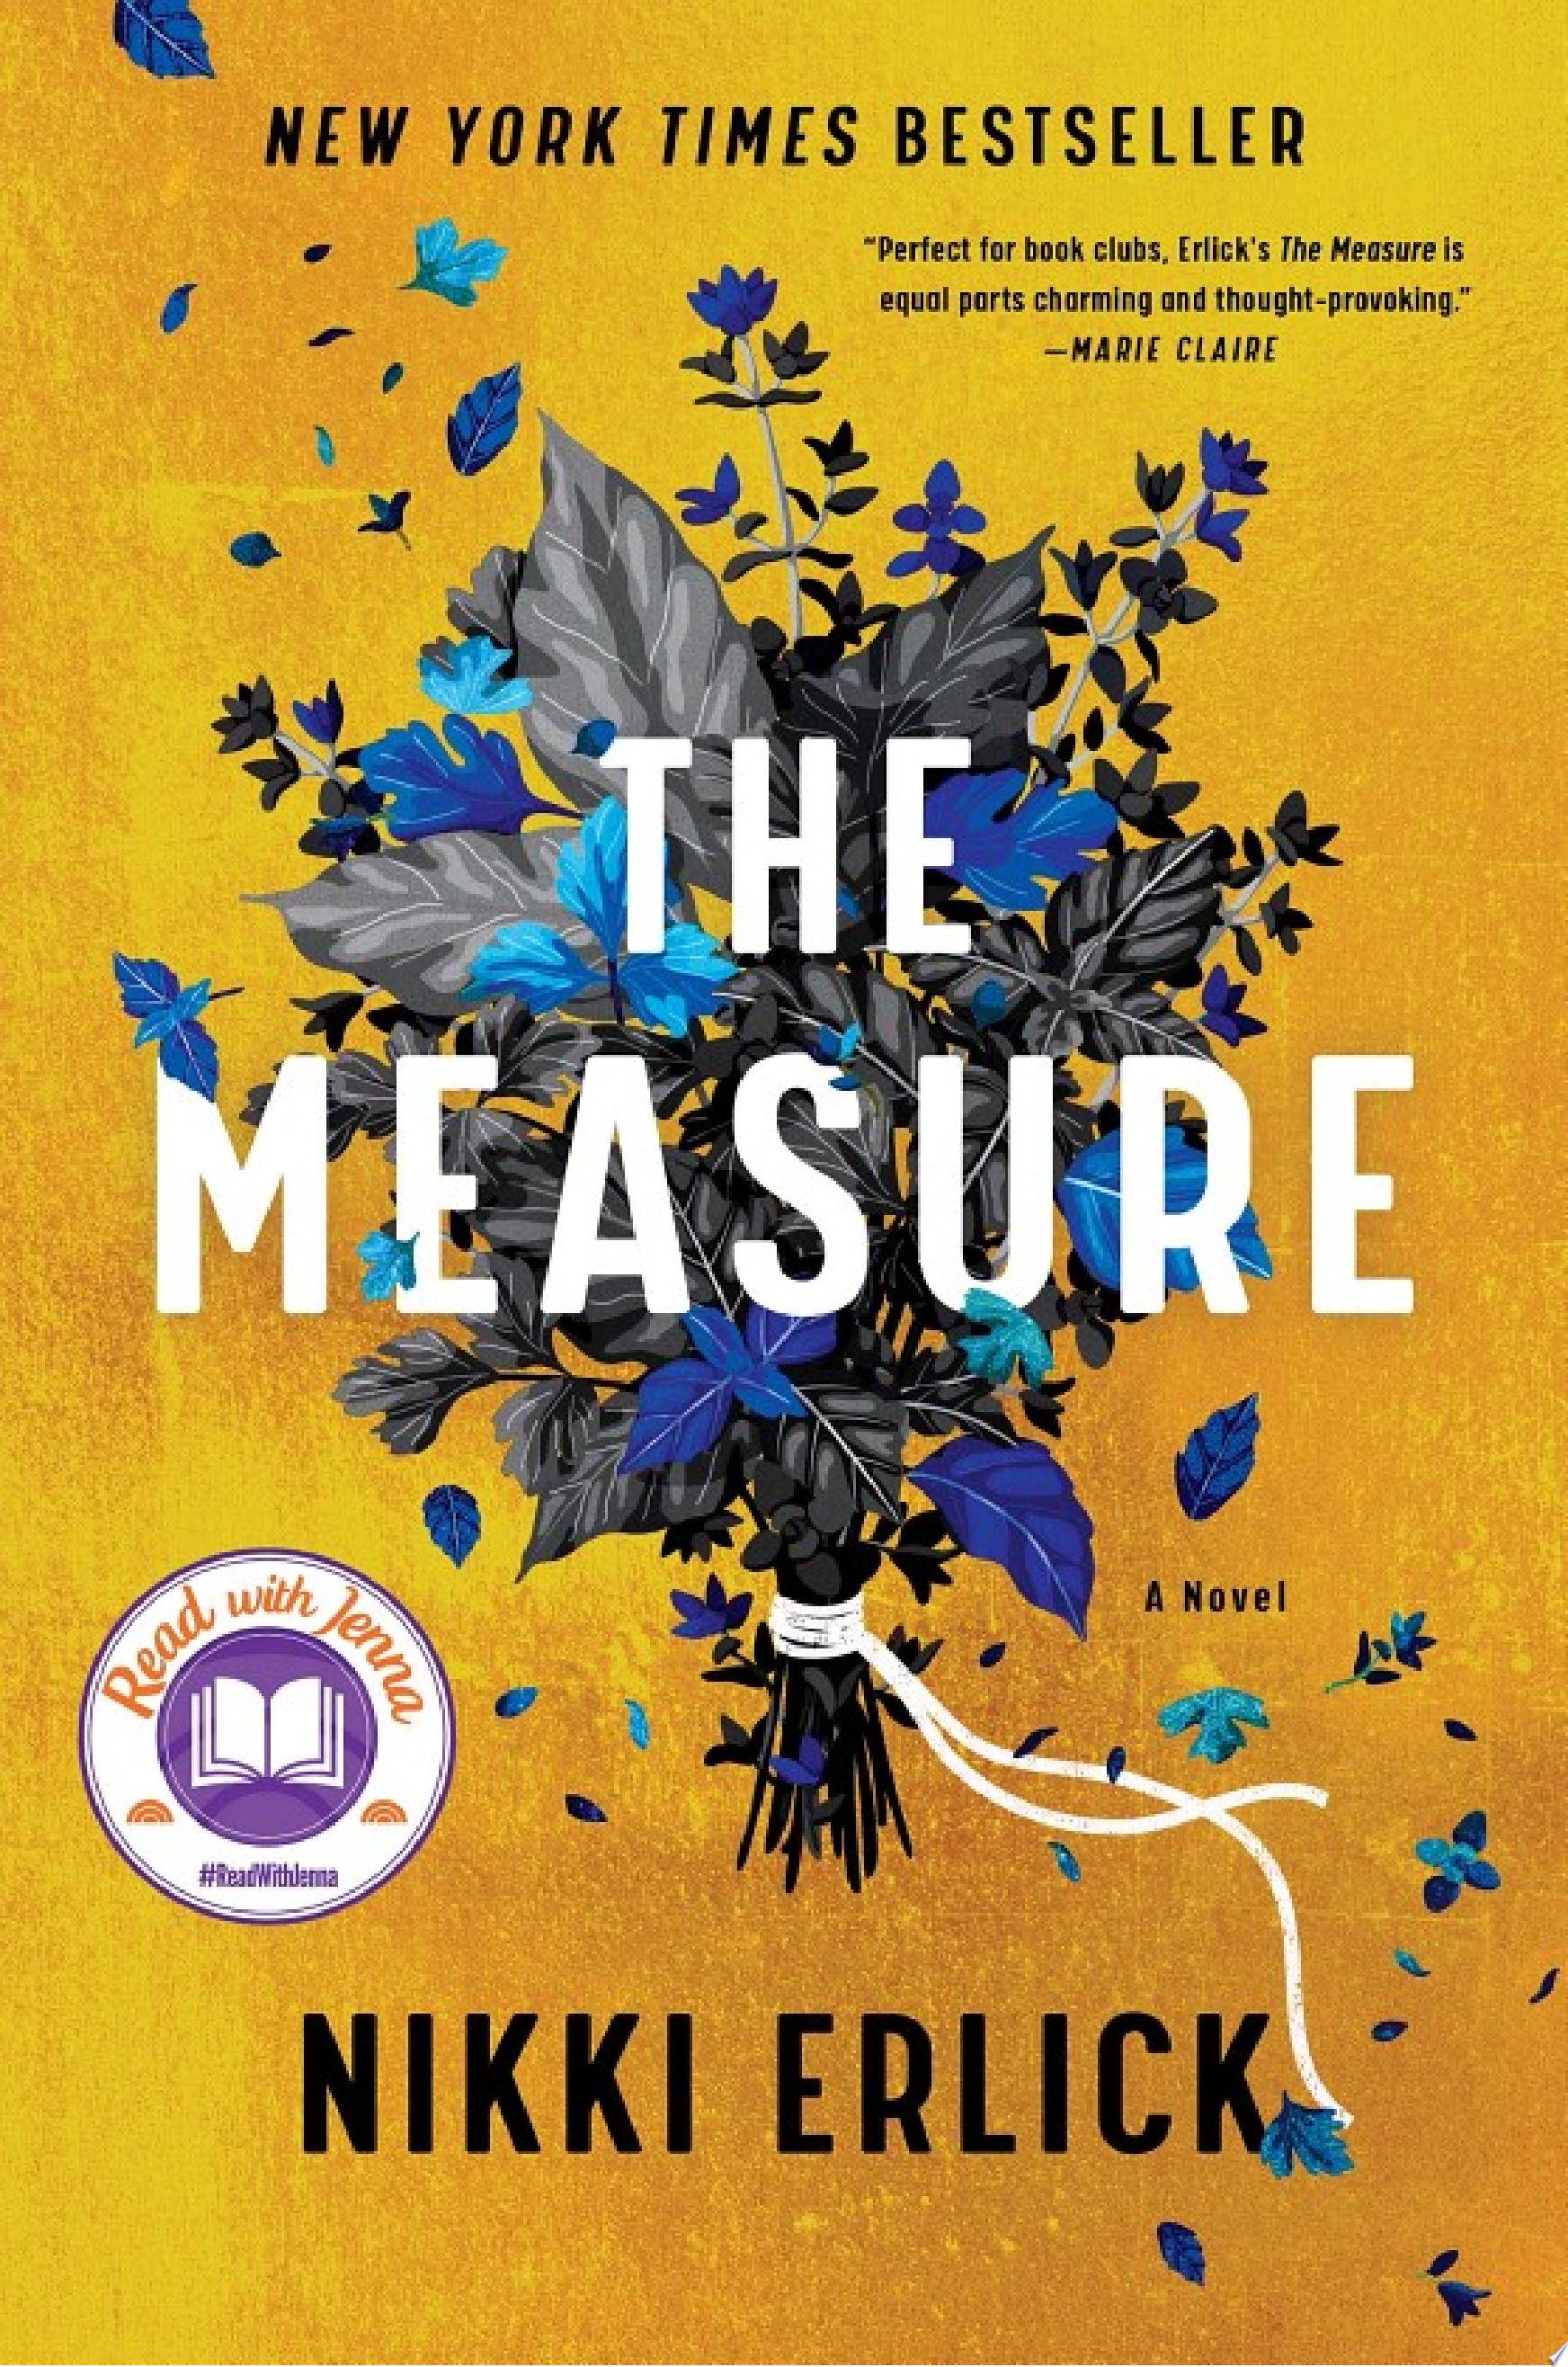 Image for "The Measure"